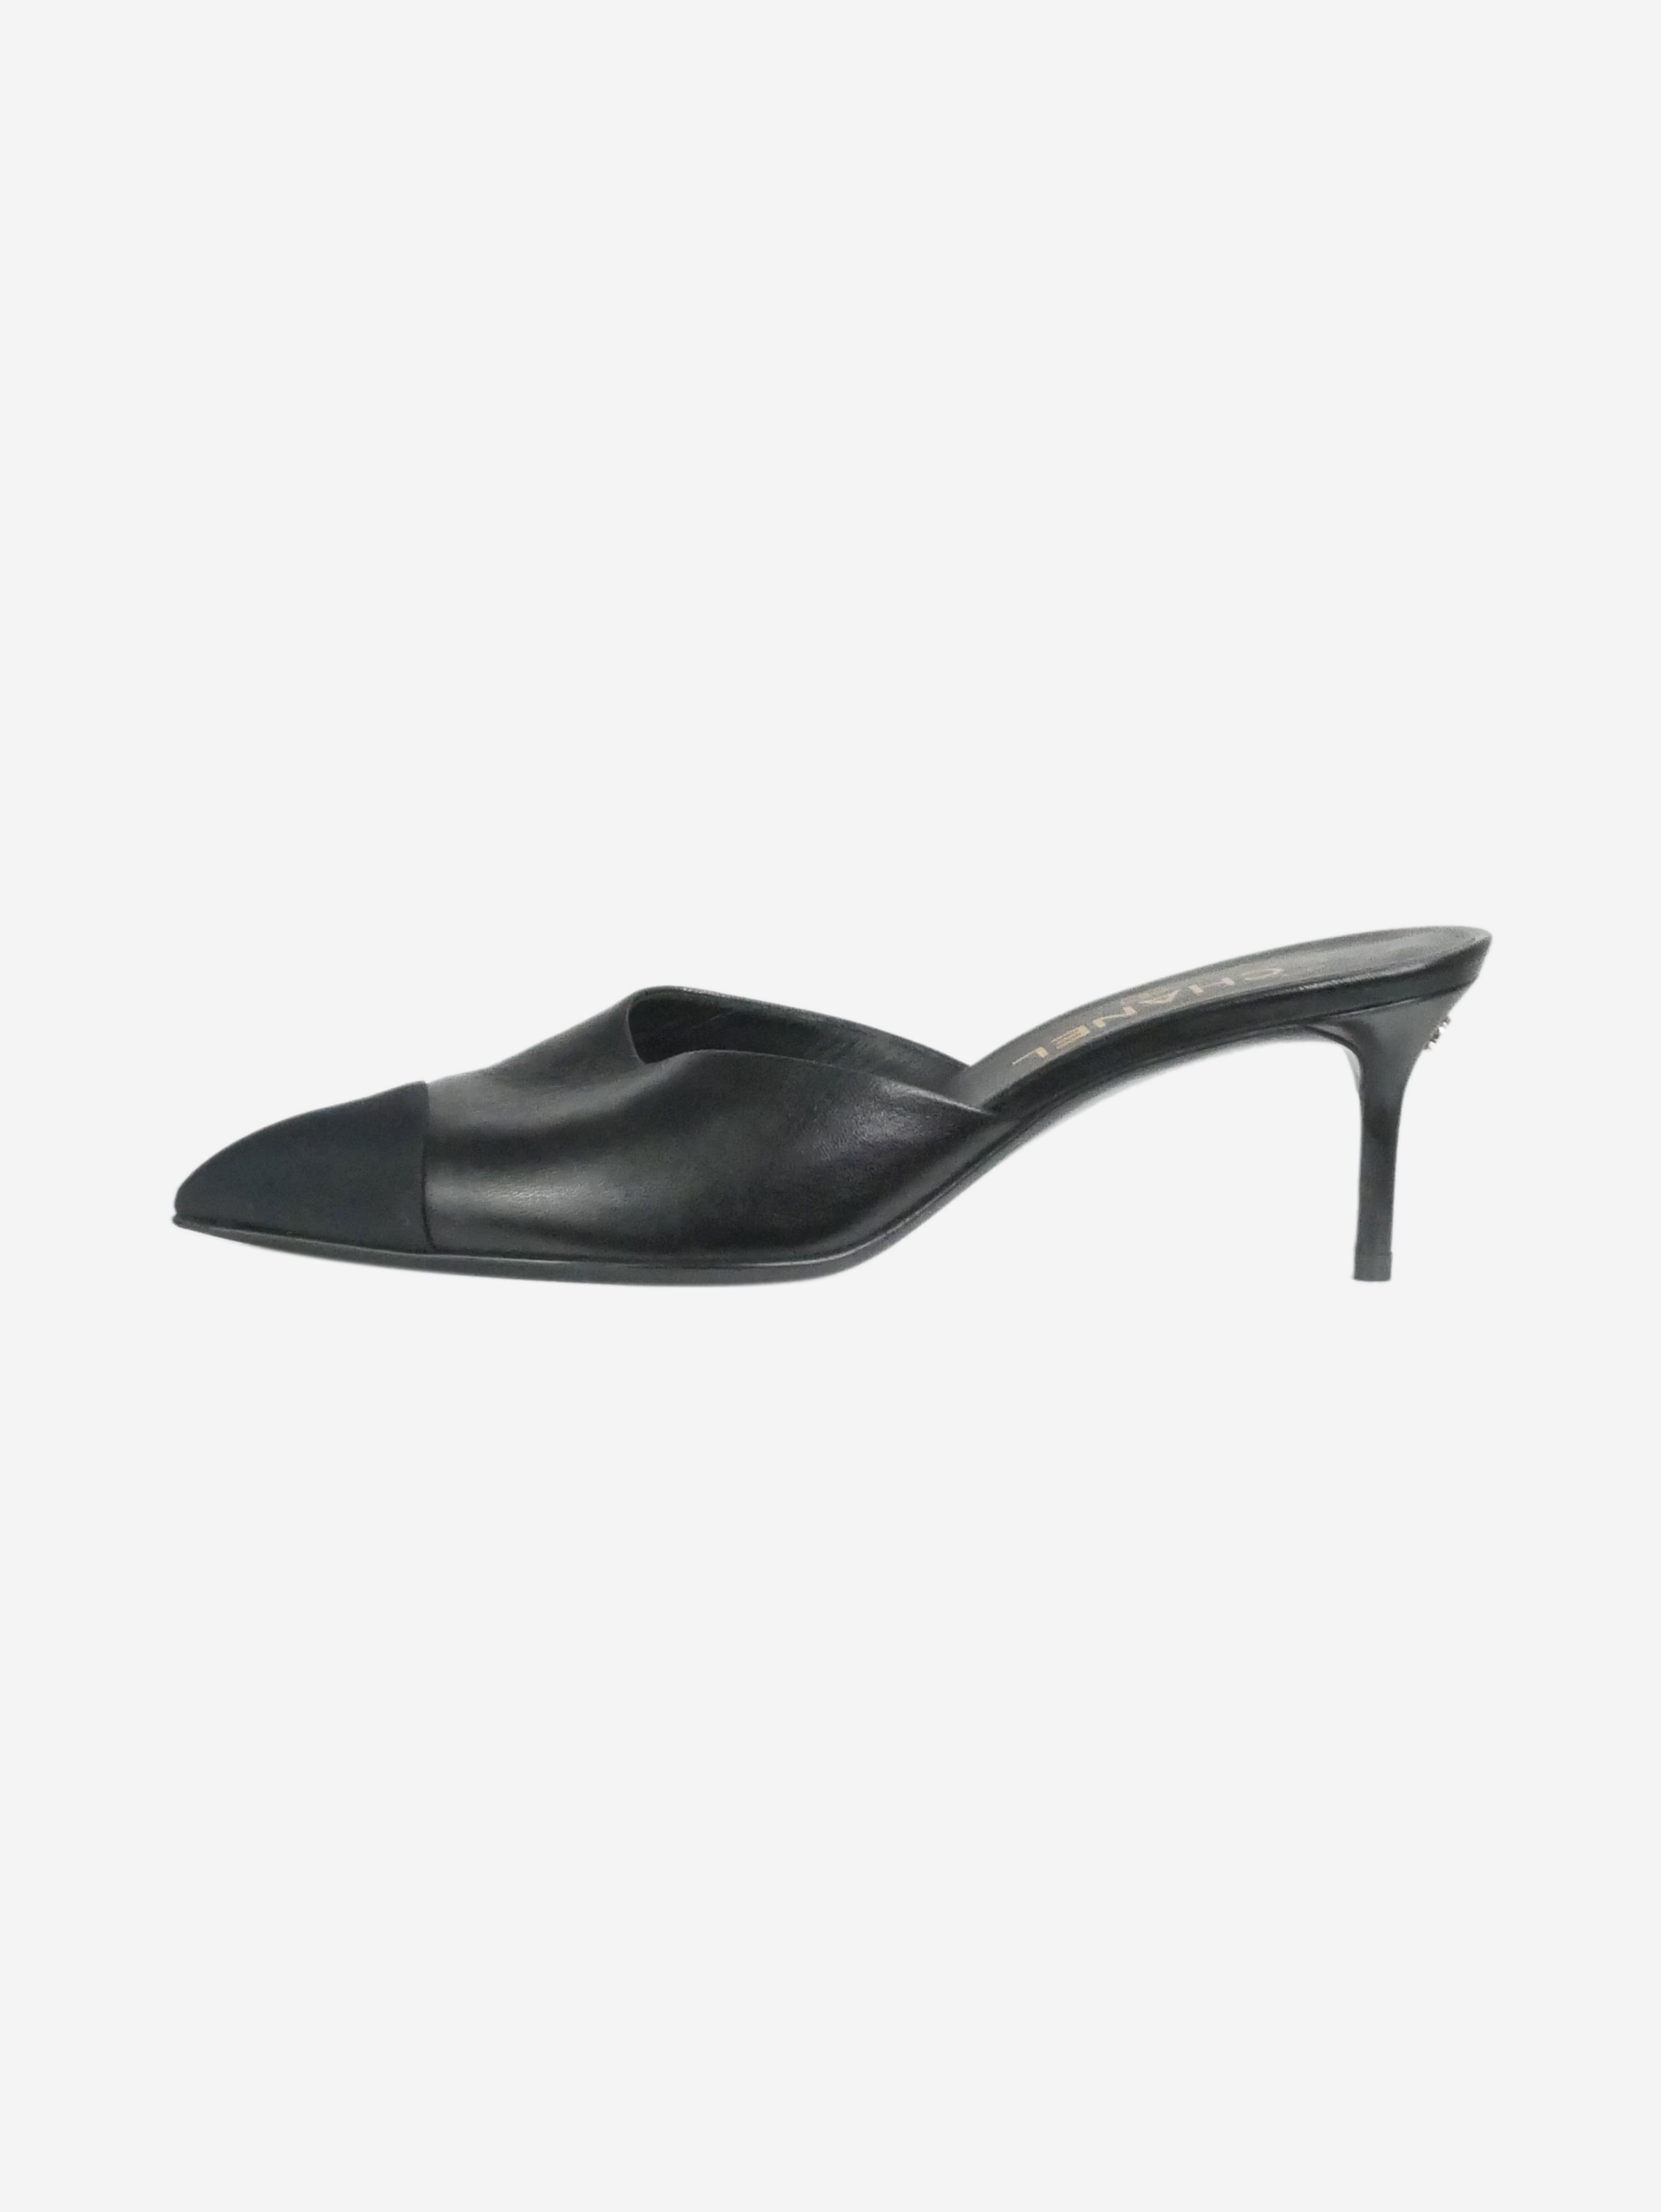 Chanel Black leather pointed-toe mules - size EU 38.5